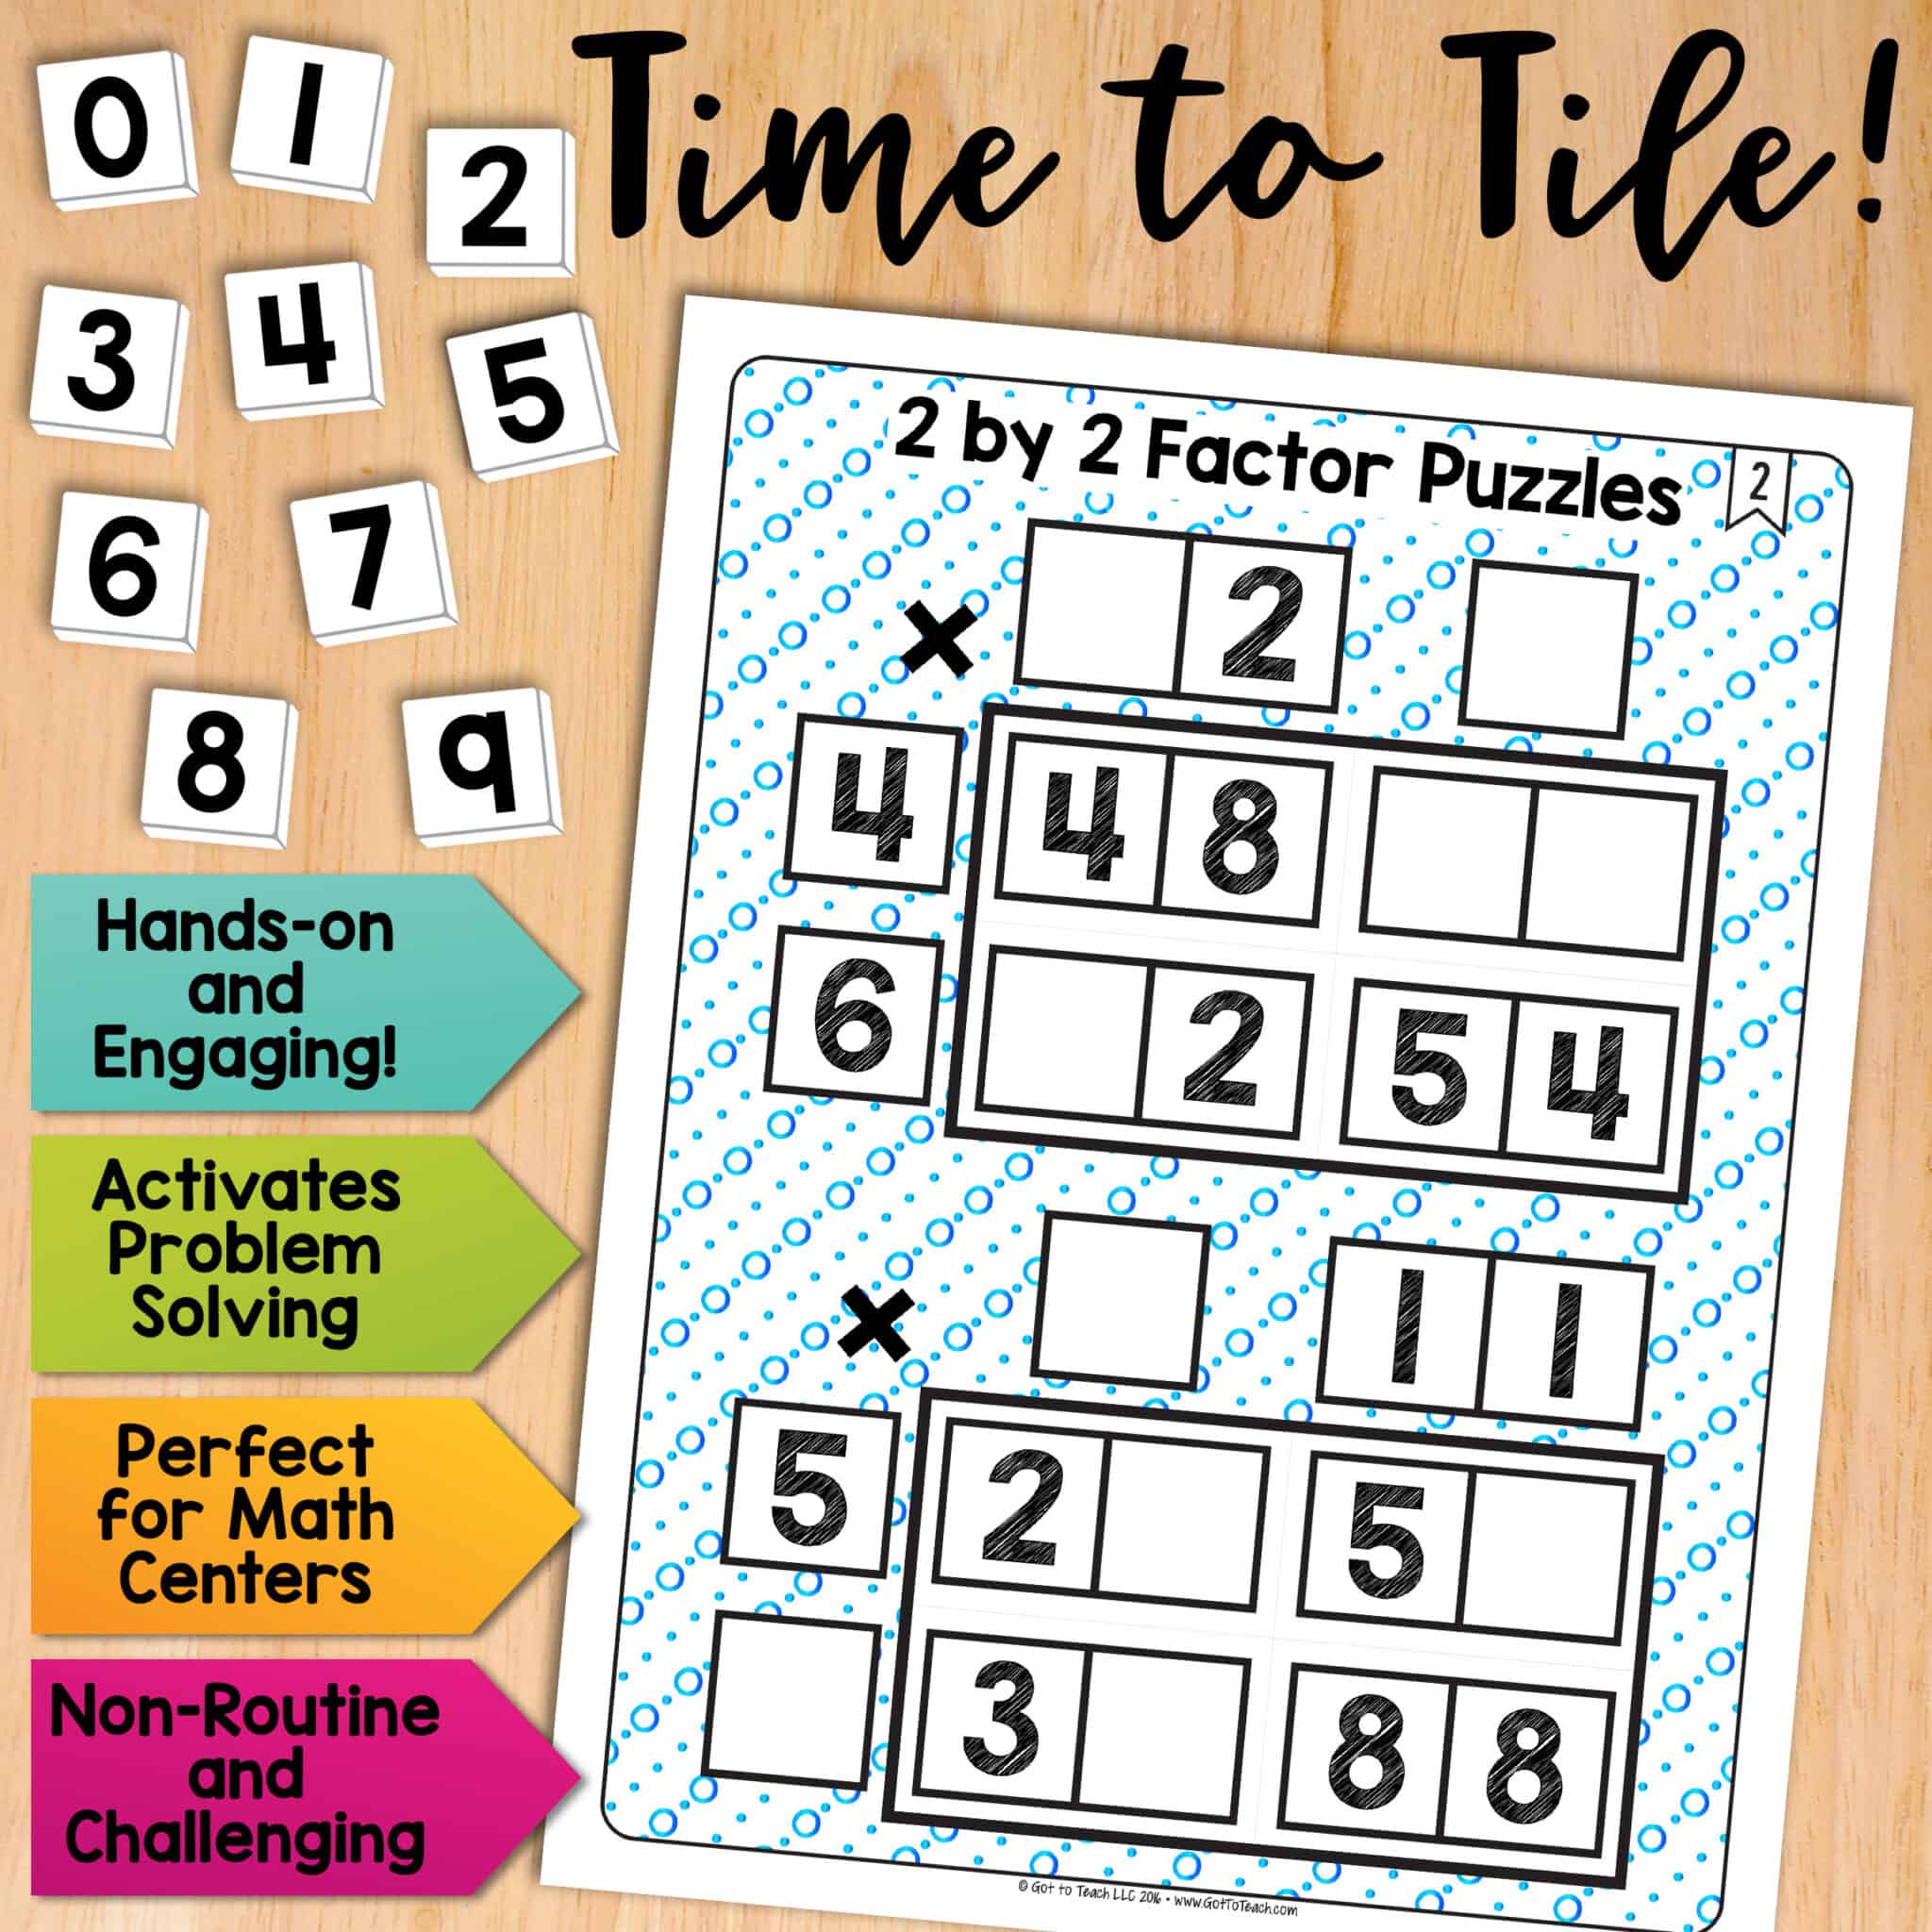 2 by 2 Factor Puzzles